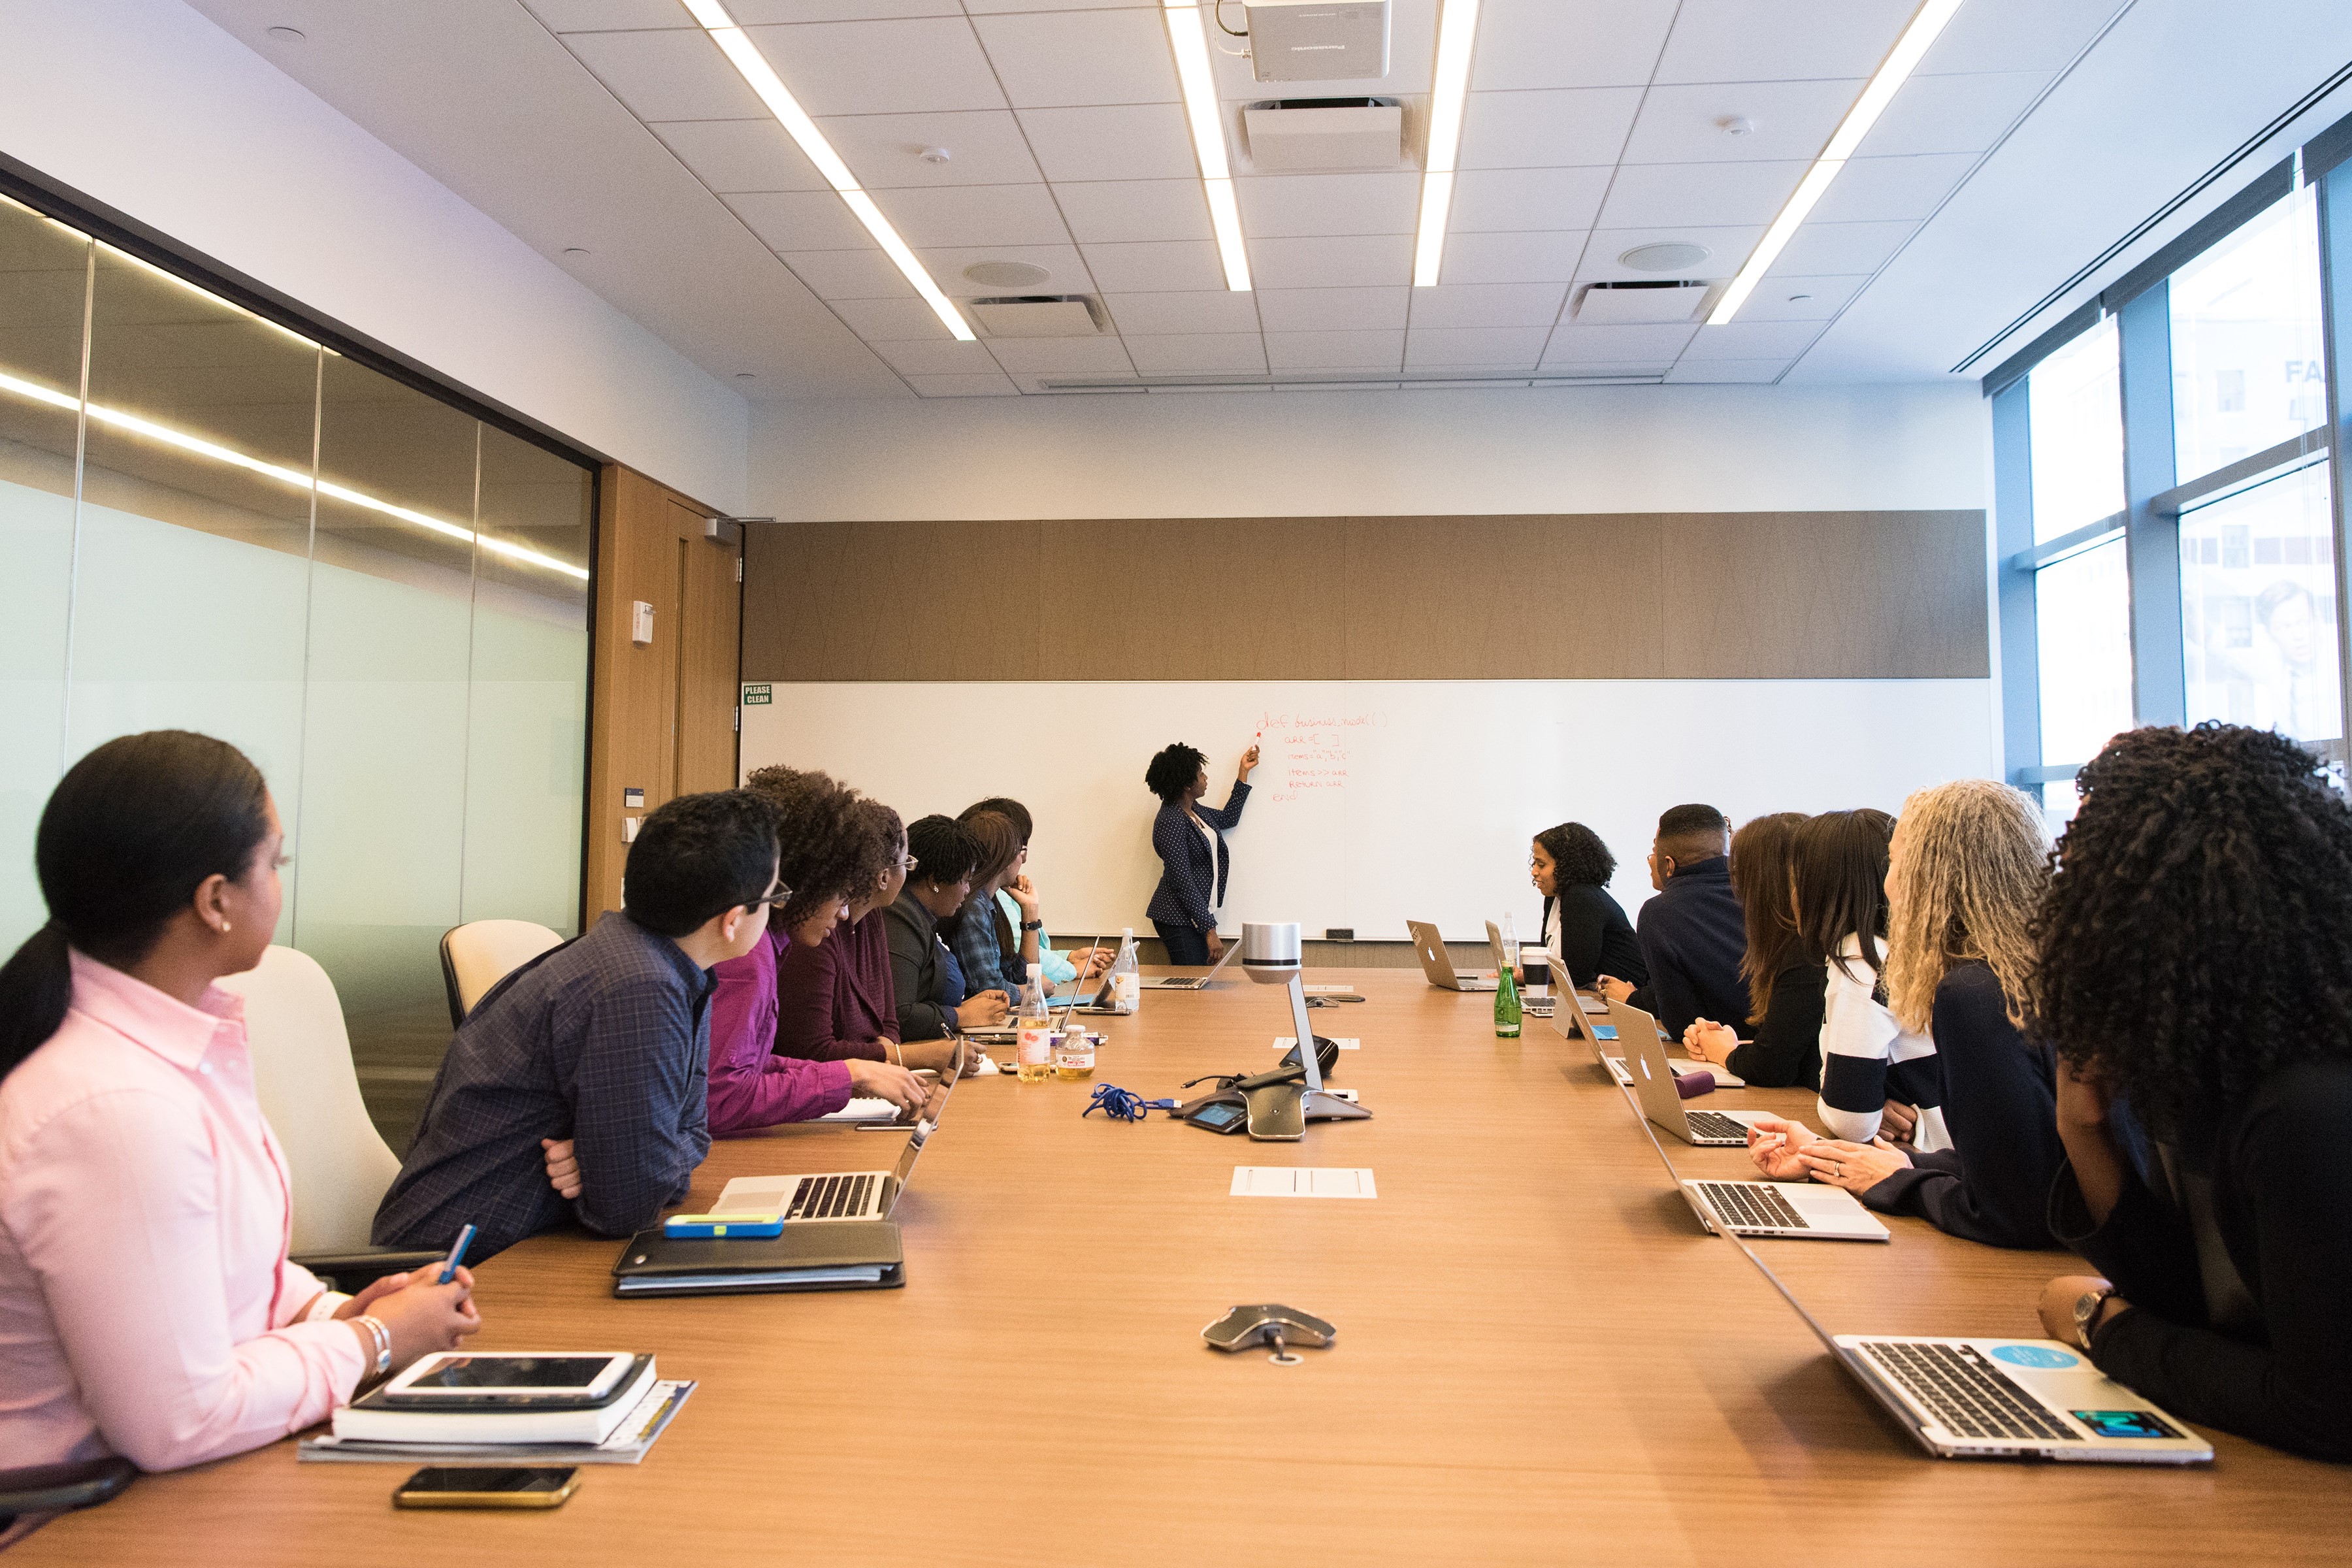 A WOMAN LEADS A MEETING AT THE HEAD OF A LONG TABLE OF OFFICE WORKERS, DRAWING ON A WHITE BOARD